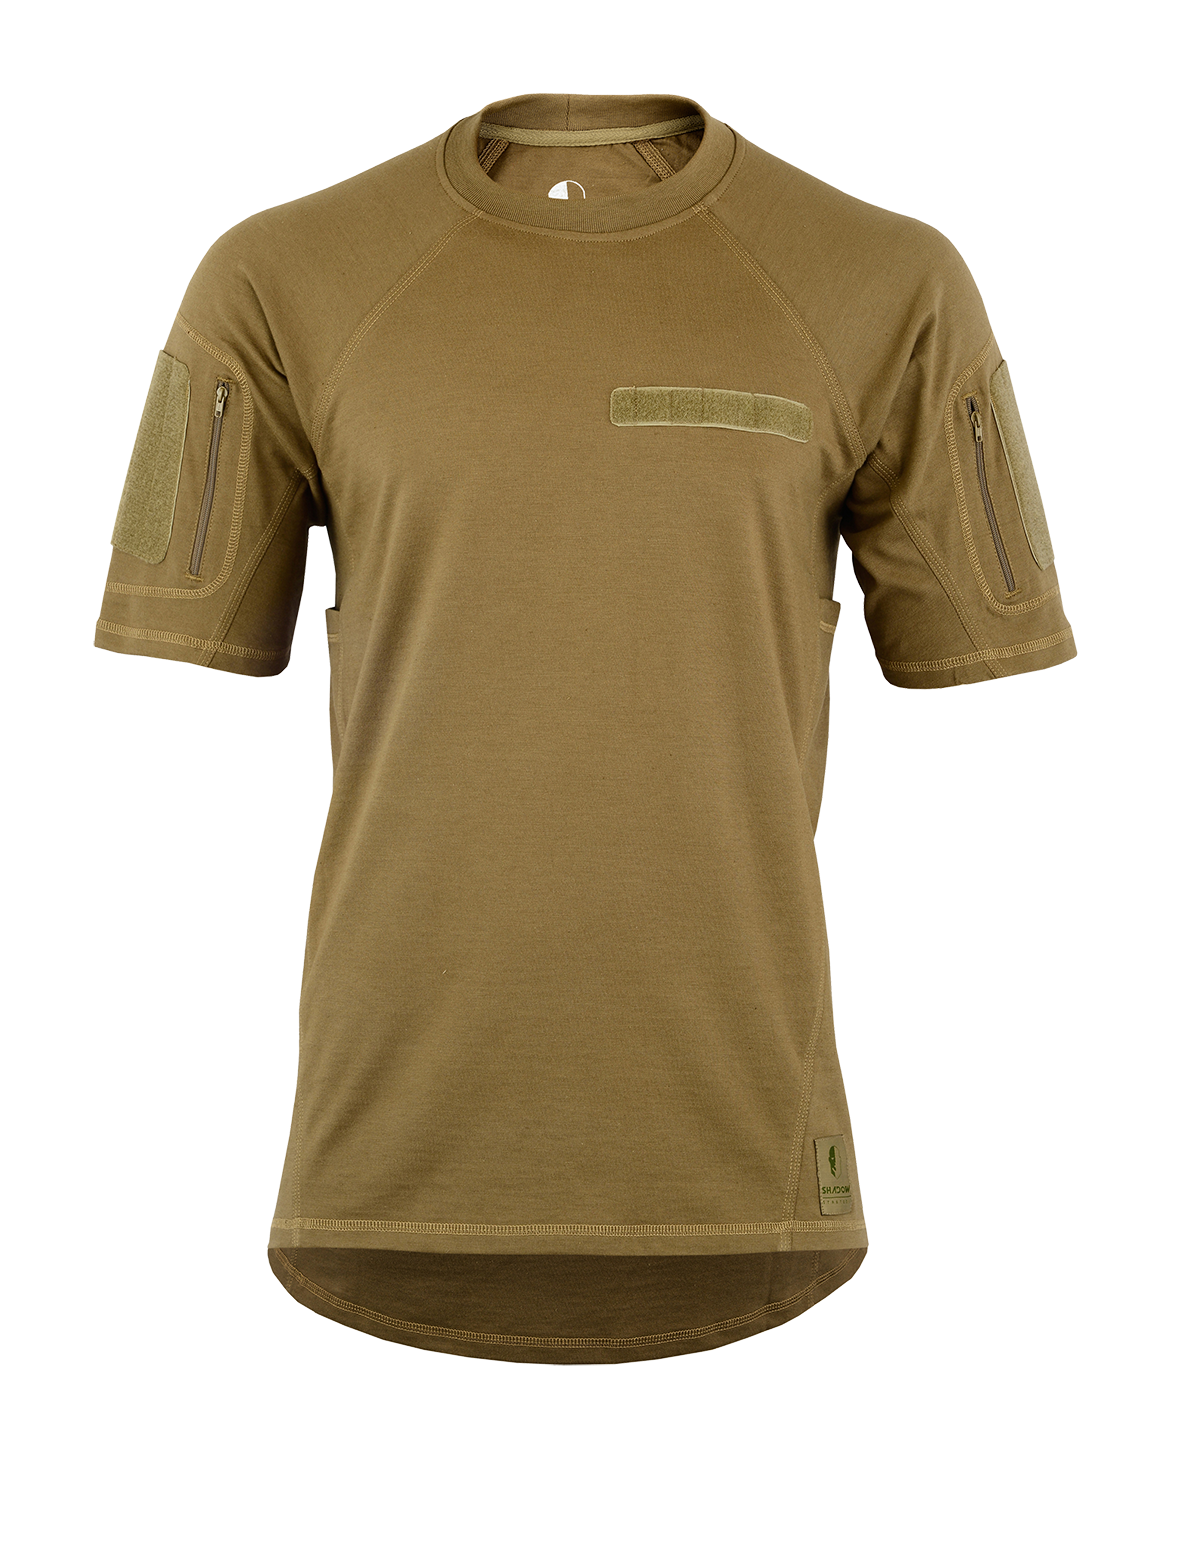 Tactical Zone instructor shirt in Coyote Camo front